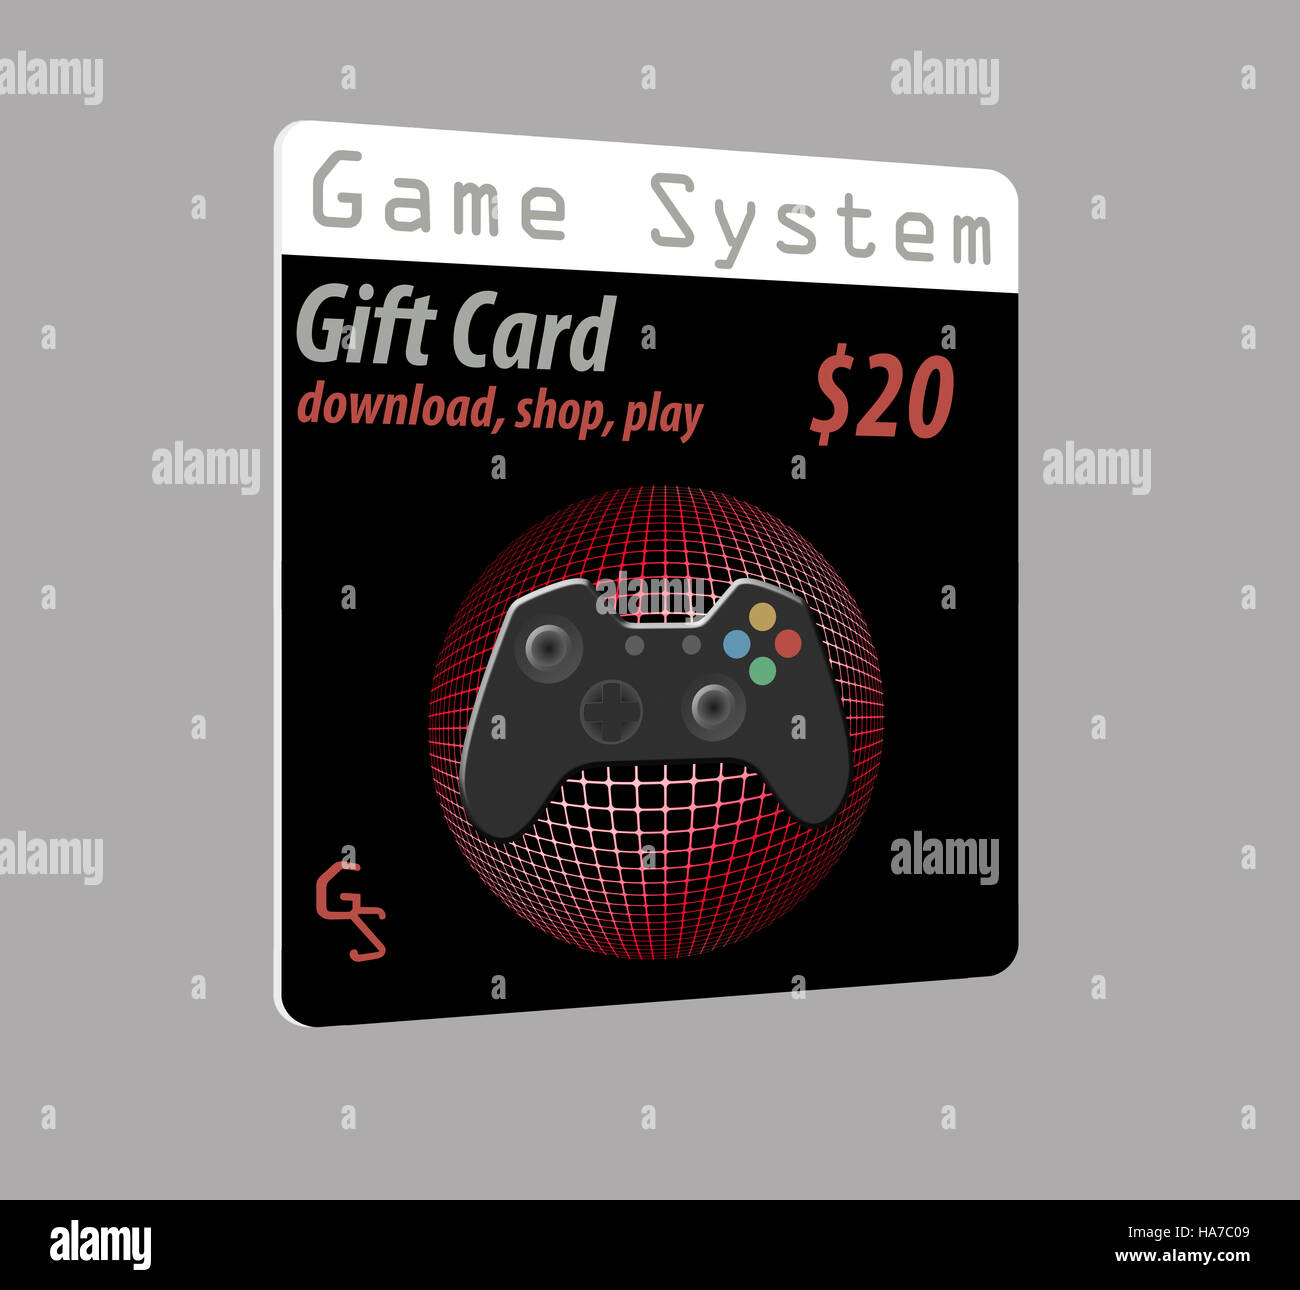 Generic, mock, gift card for home game system isolated on gray background. Use it to shop, download games and play games. Stock Photo